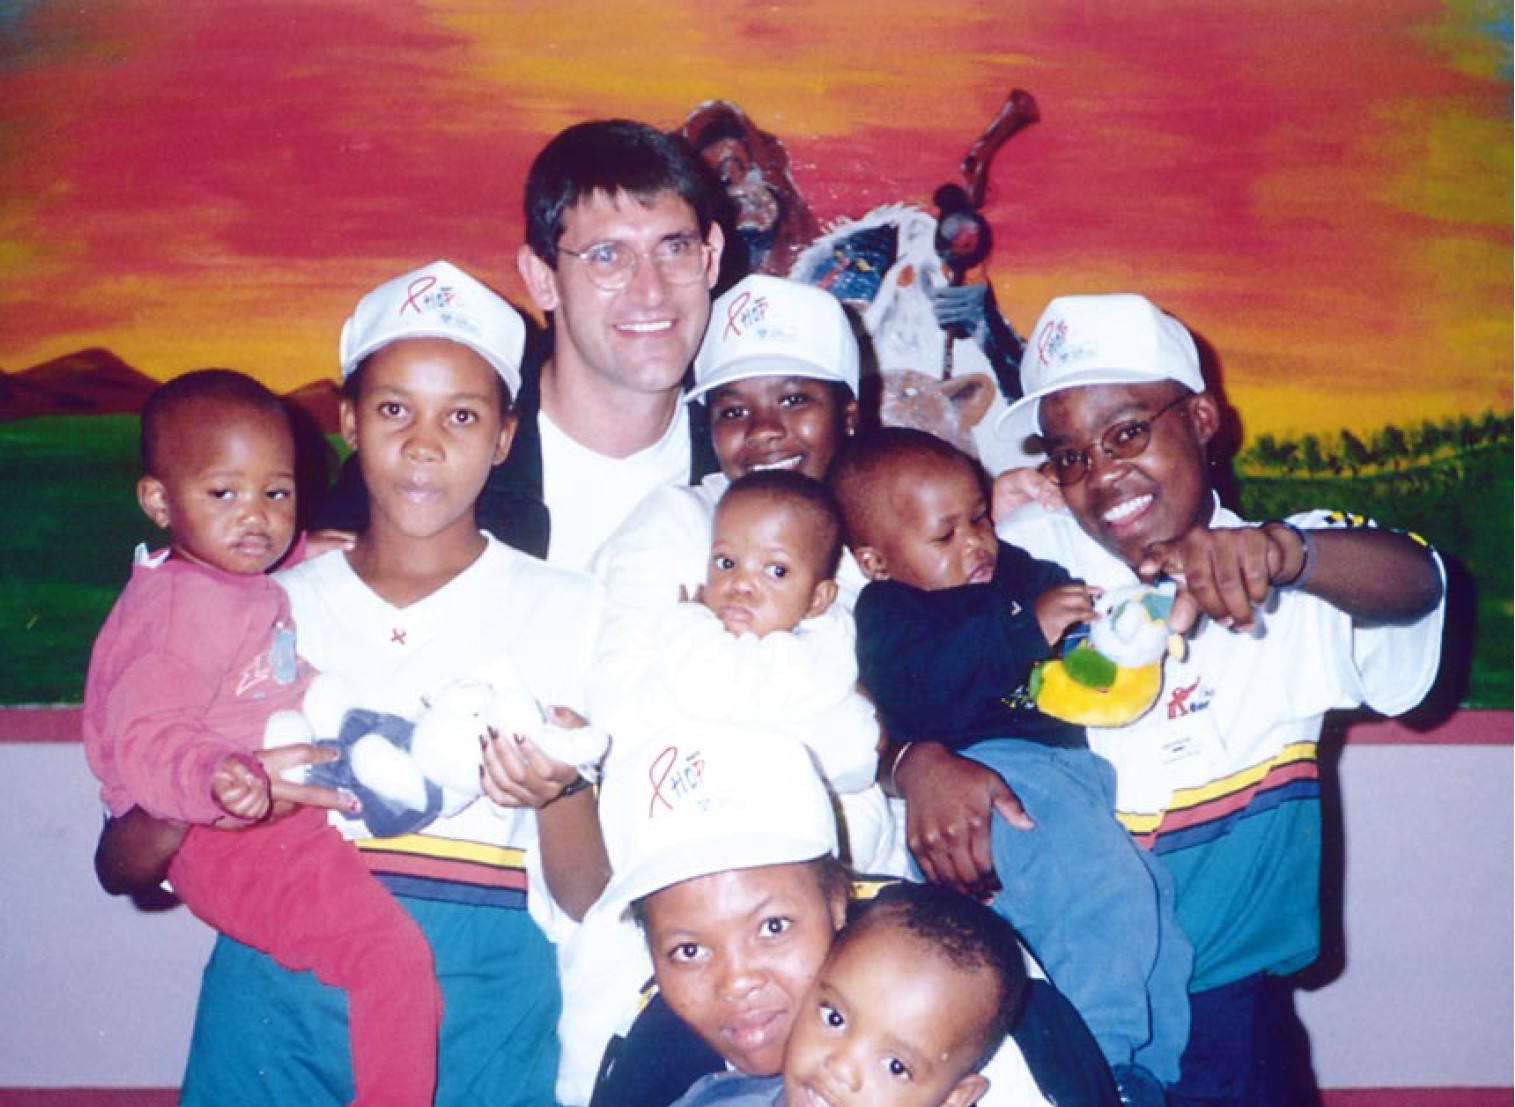 Christo with friends at Nazareth House in Cape Town